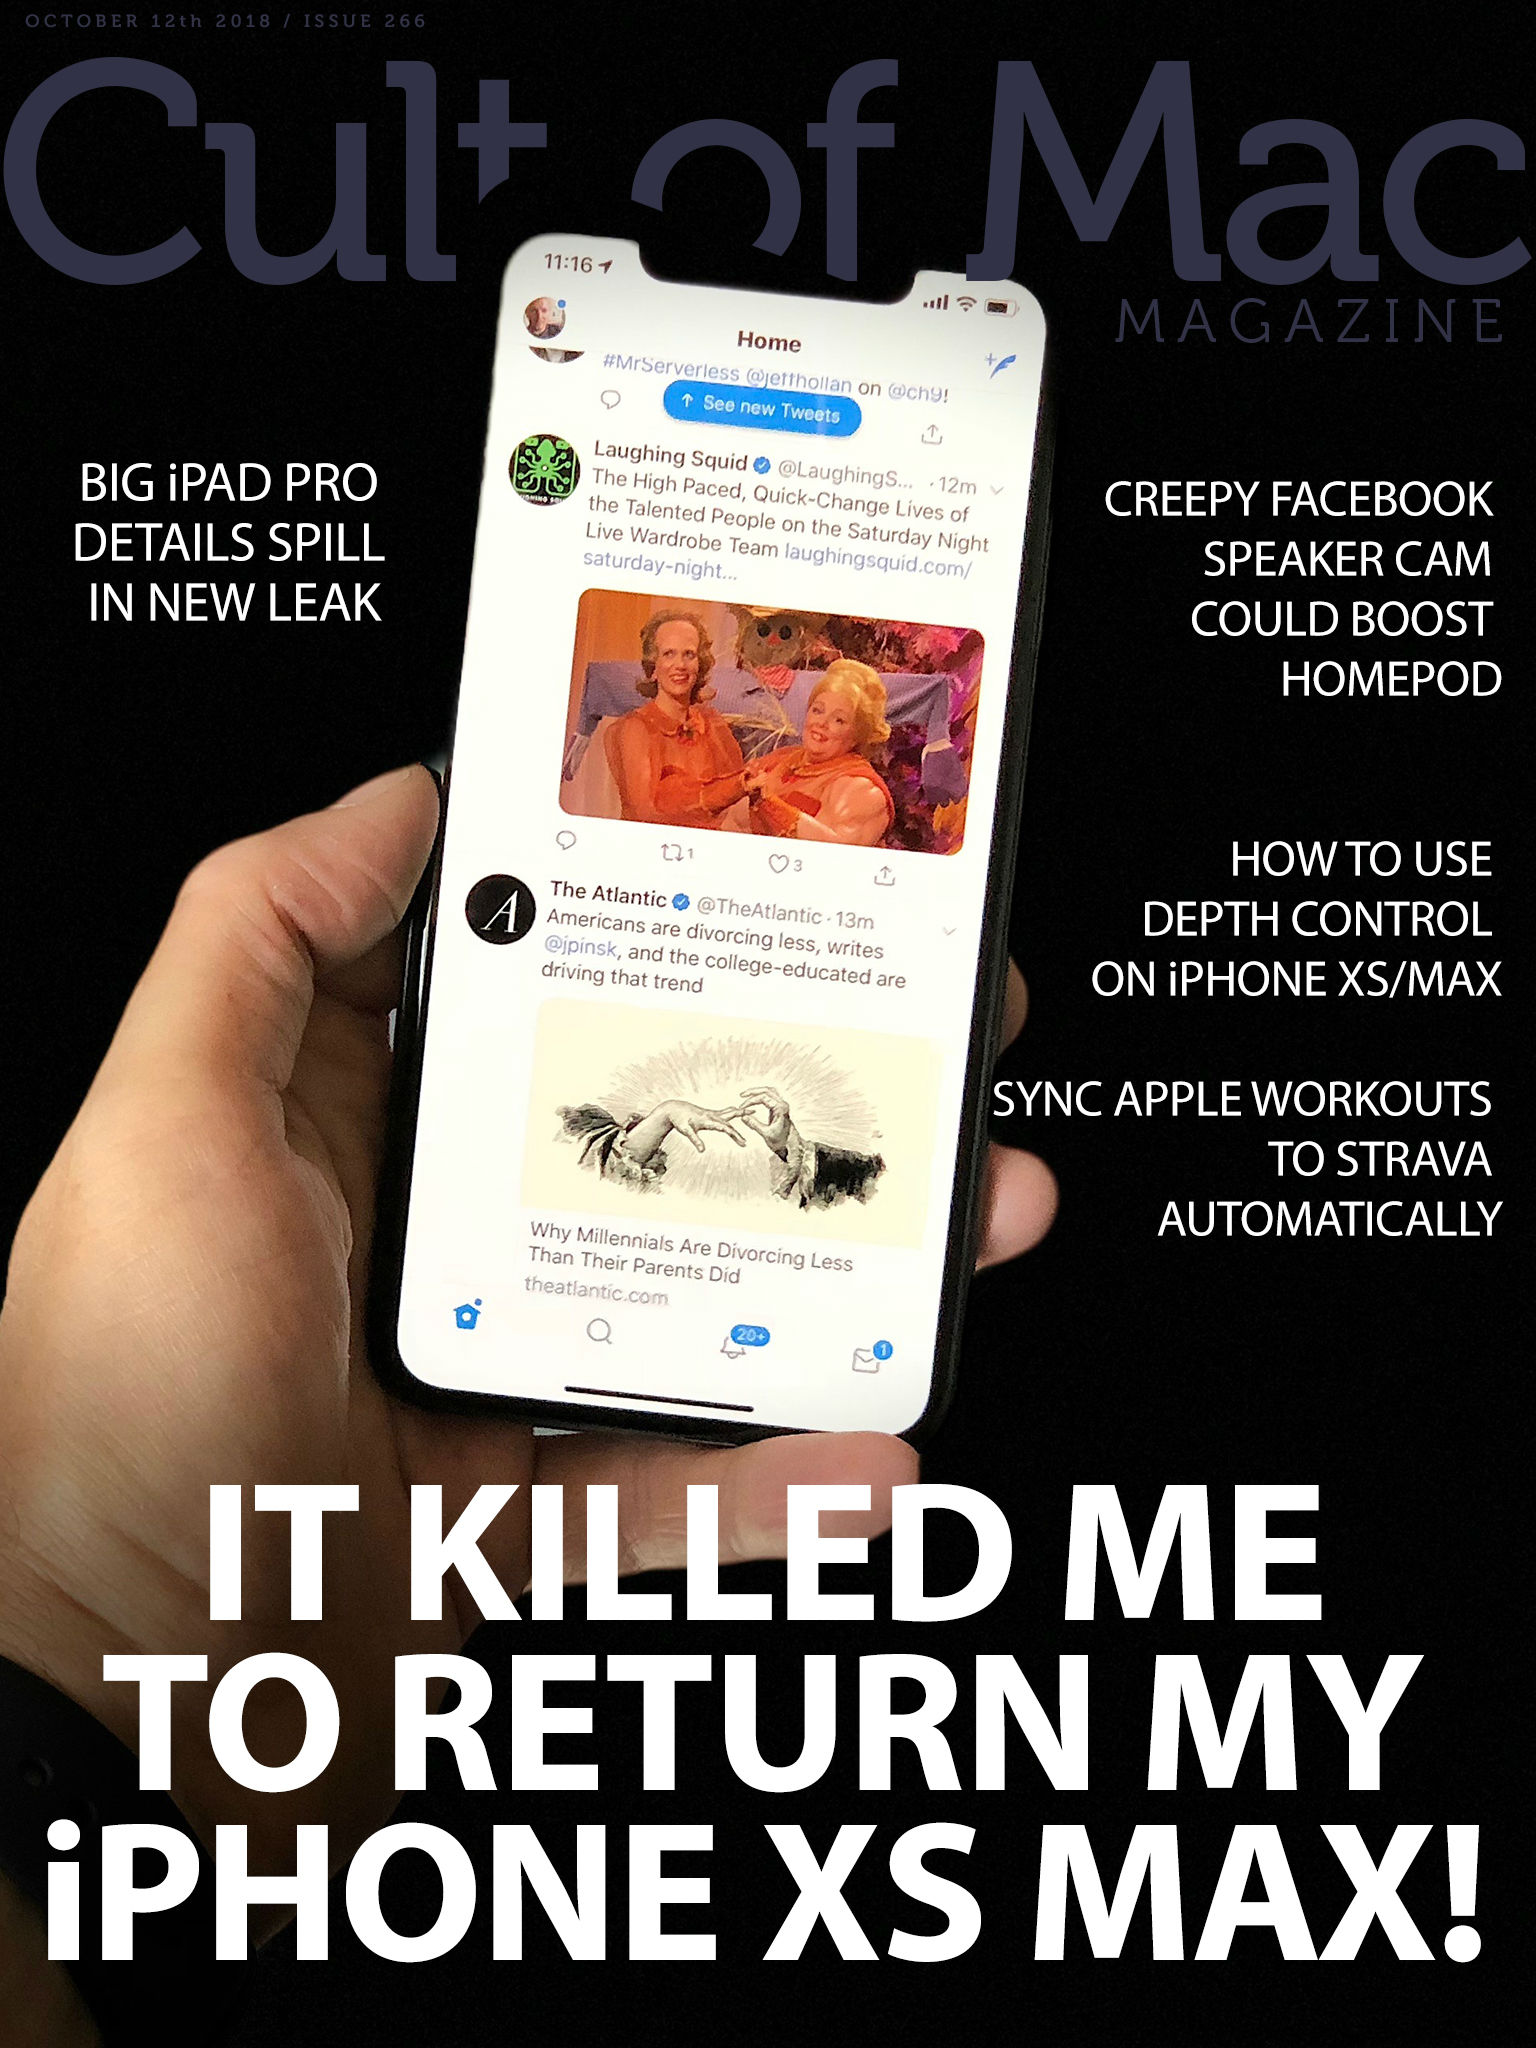 Cult of Mac Magazine Issue 266: It killed me to return my iPhone XS Max!